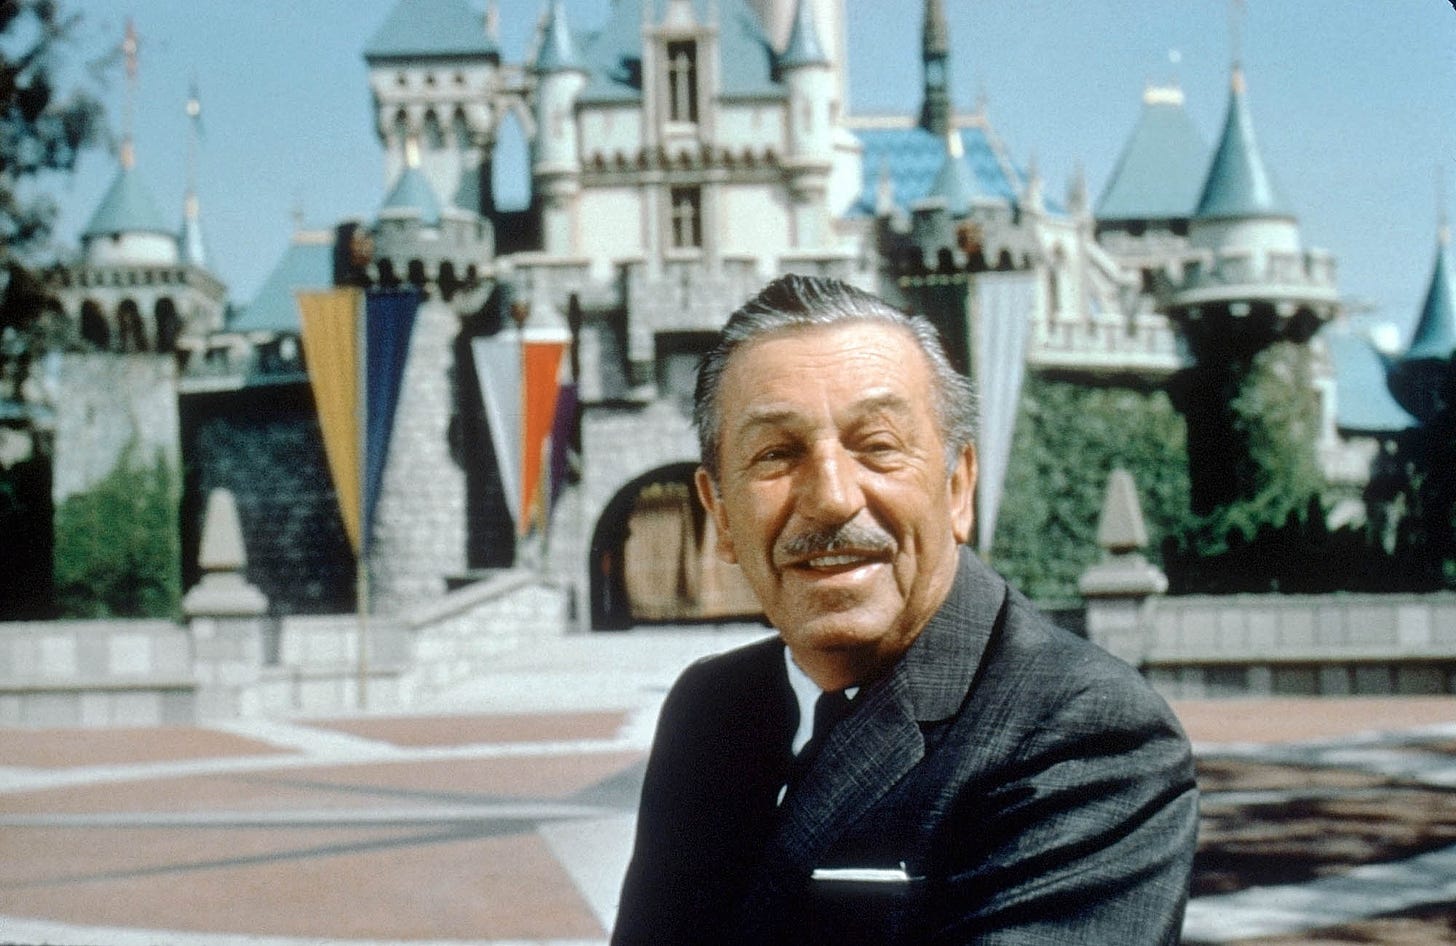 Today in History, July 17, 1955: Disneyland opened with live TV special